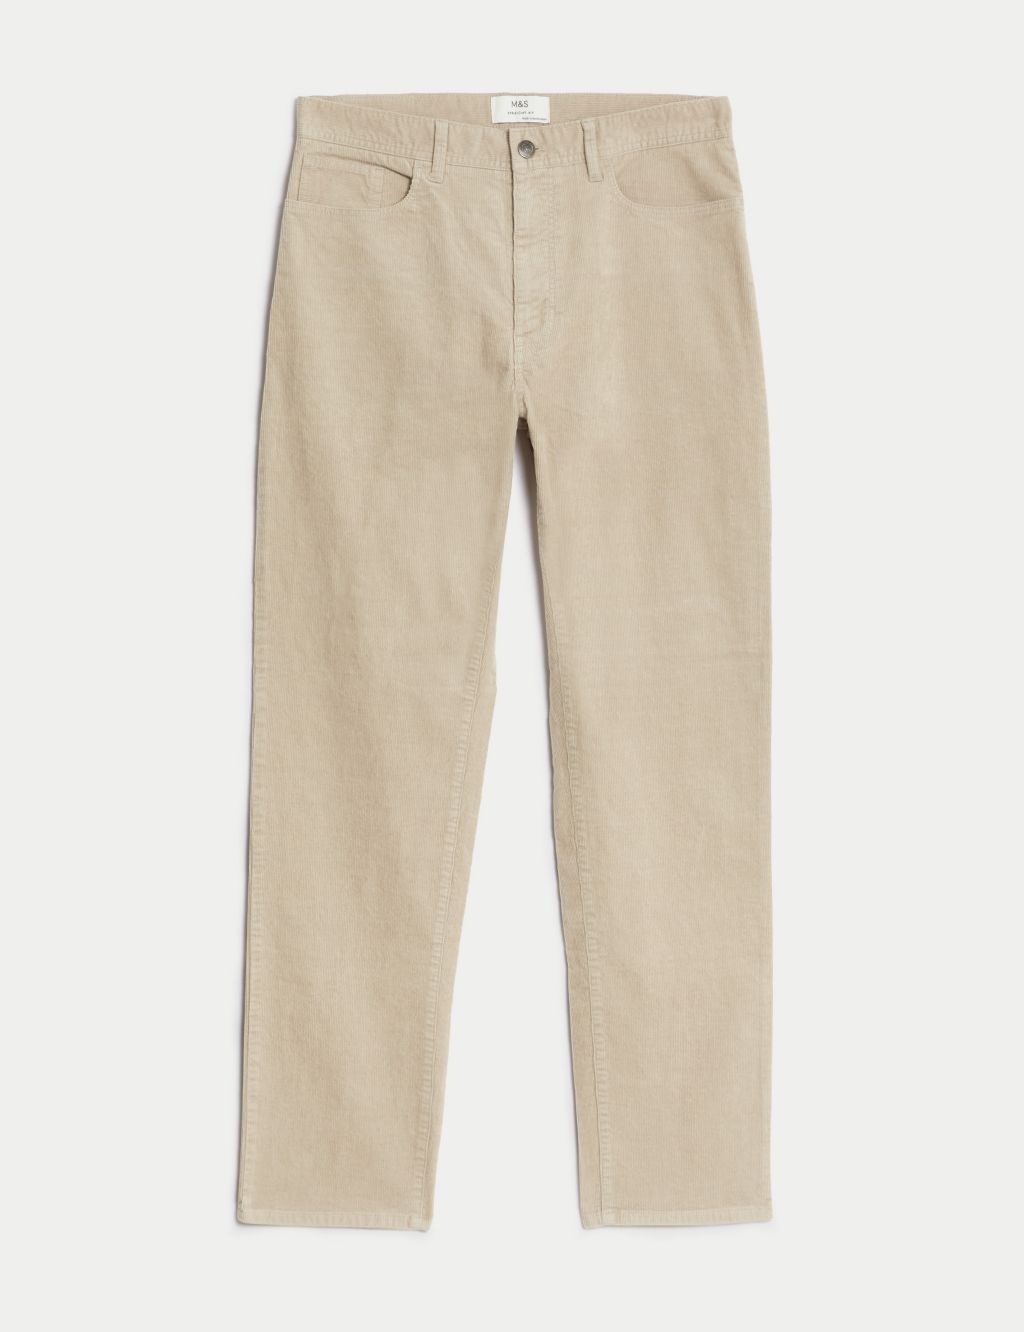 Straight Fit Corduroy 5 Pocket Trousers image 2